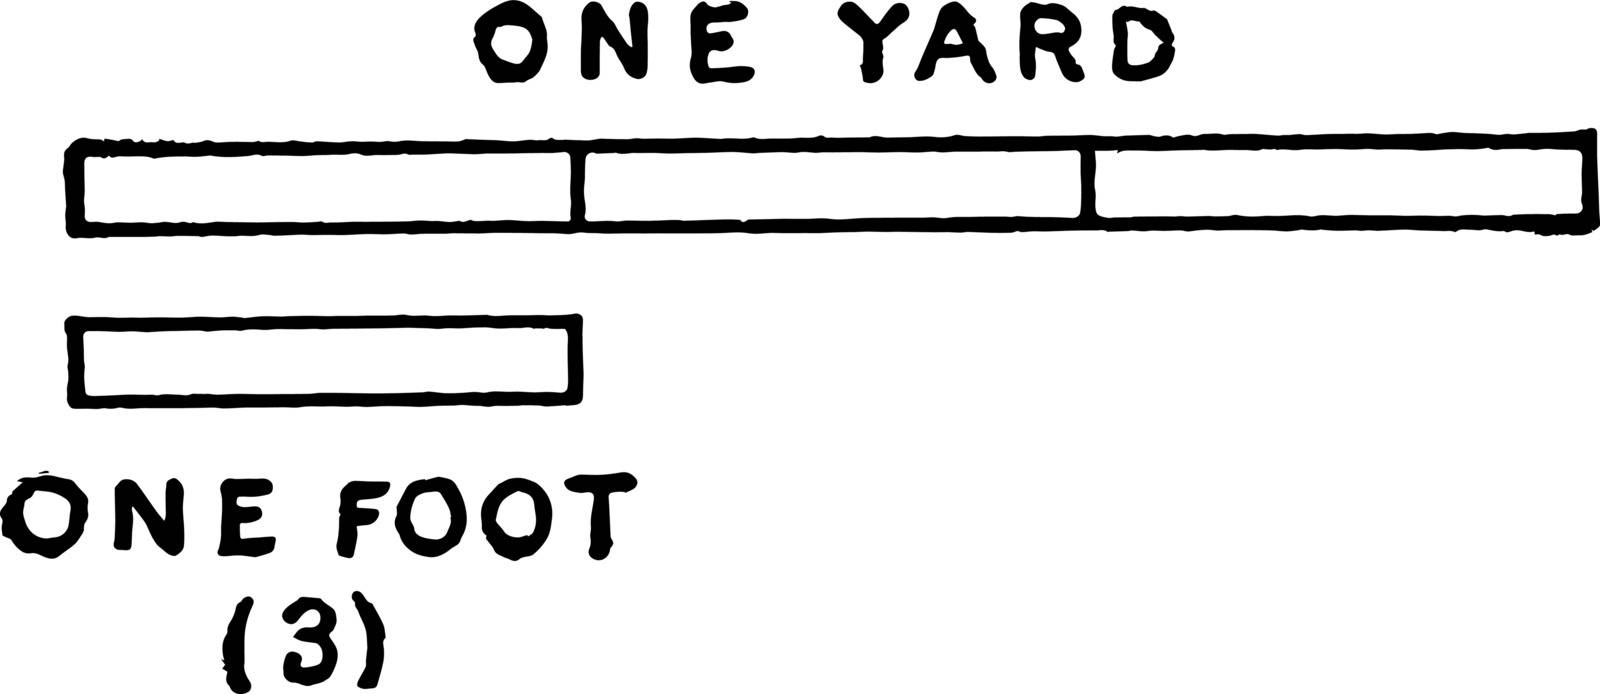 Picture showing the measurement that one foot is one third of a yard, vintage line drawing or engraving illustration.